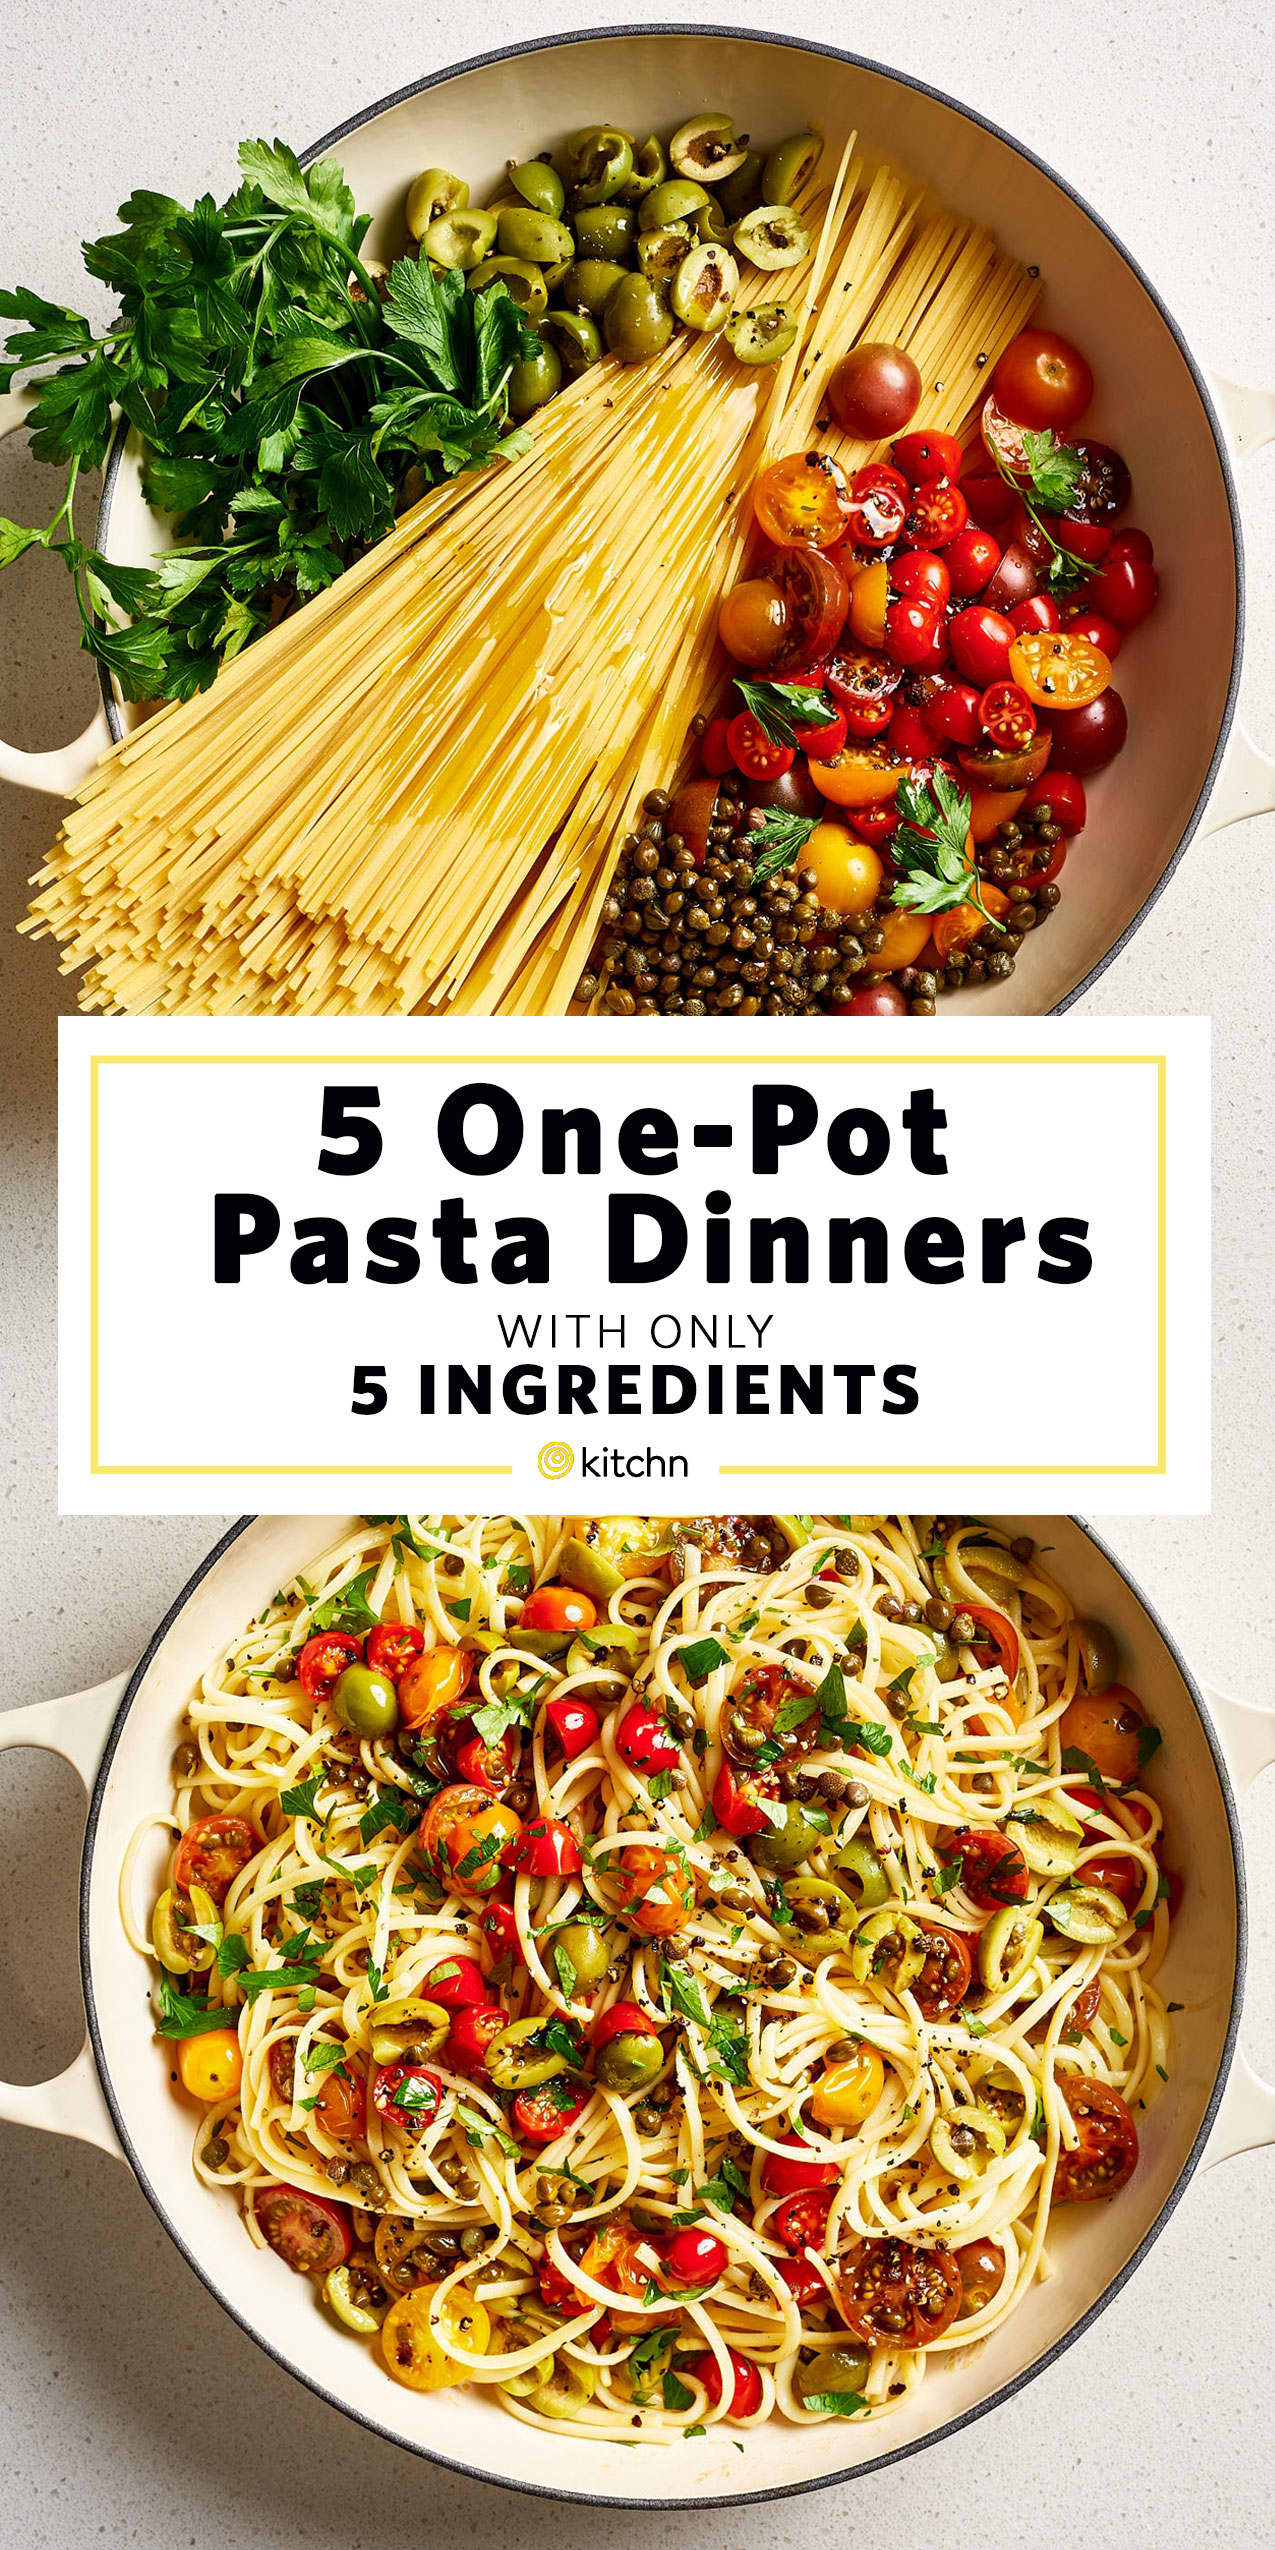 These Magical One-Pot Pasta Recipes Only Need 5 Ingredients and a